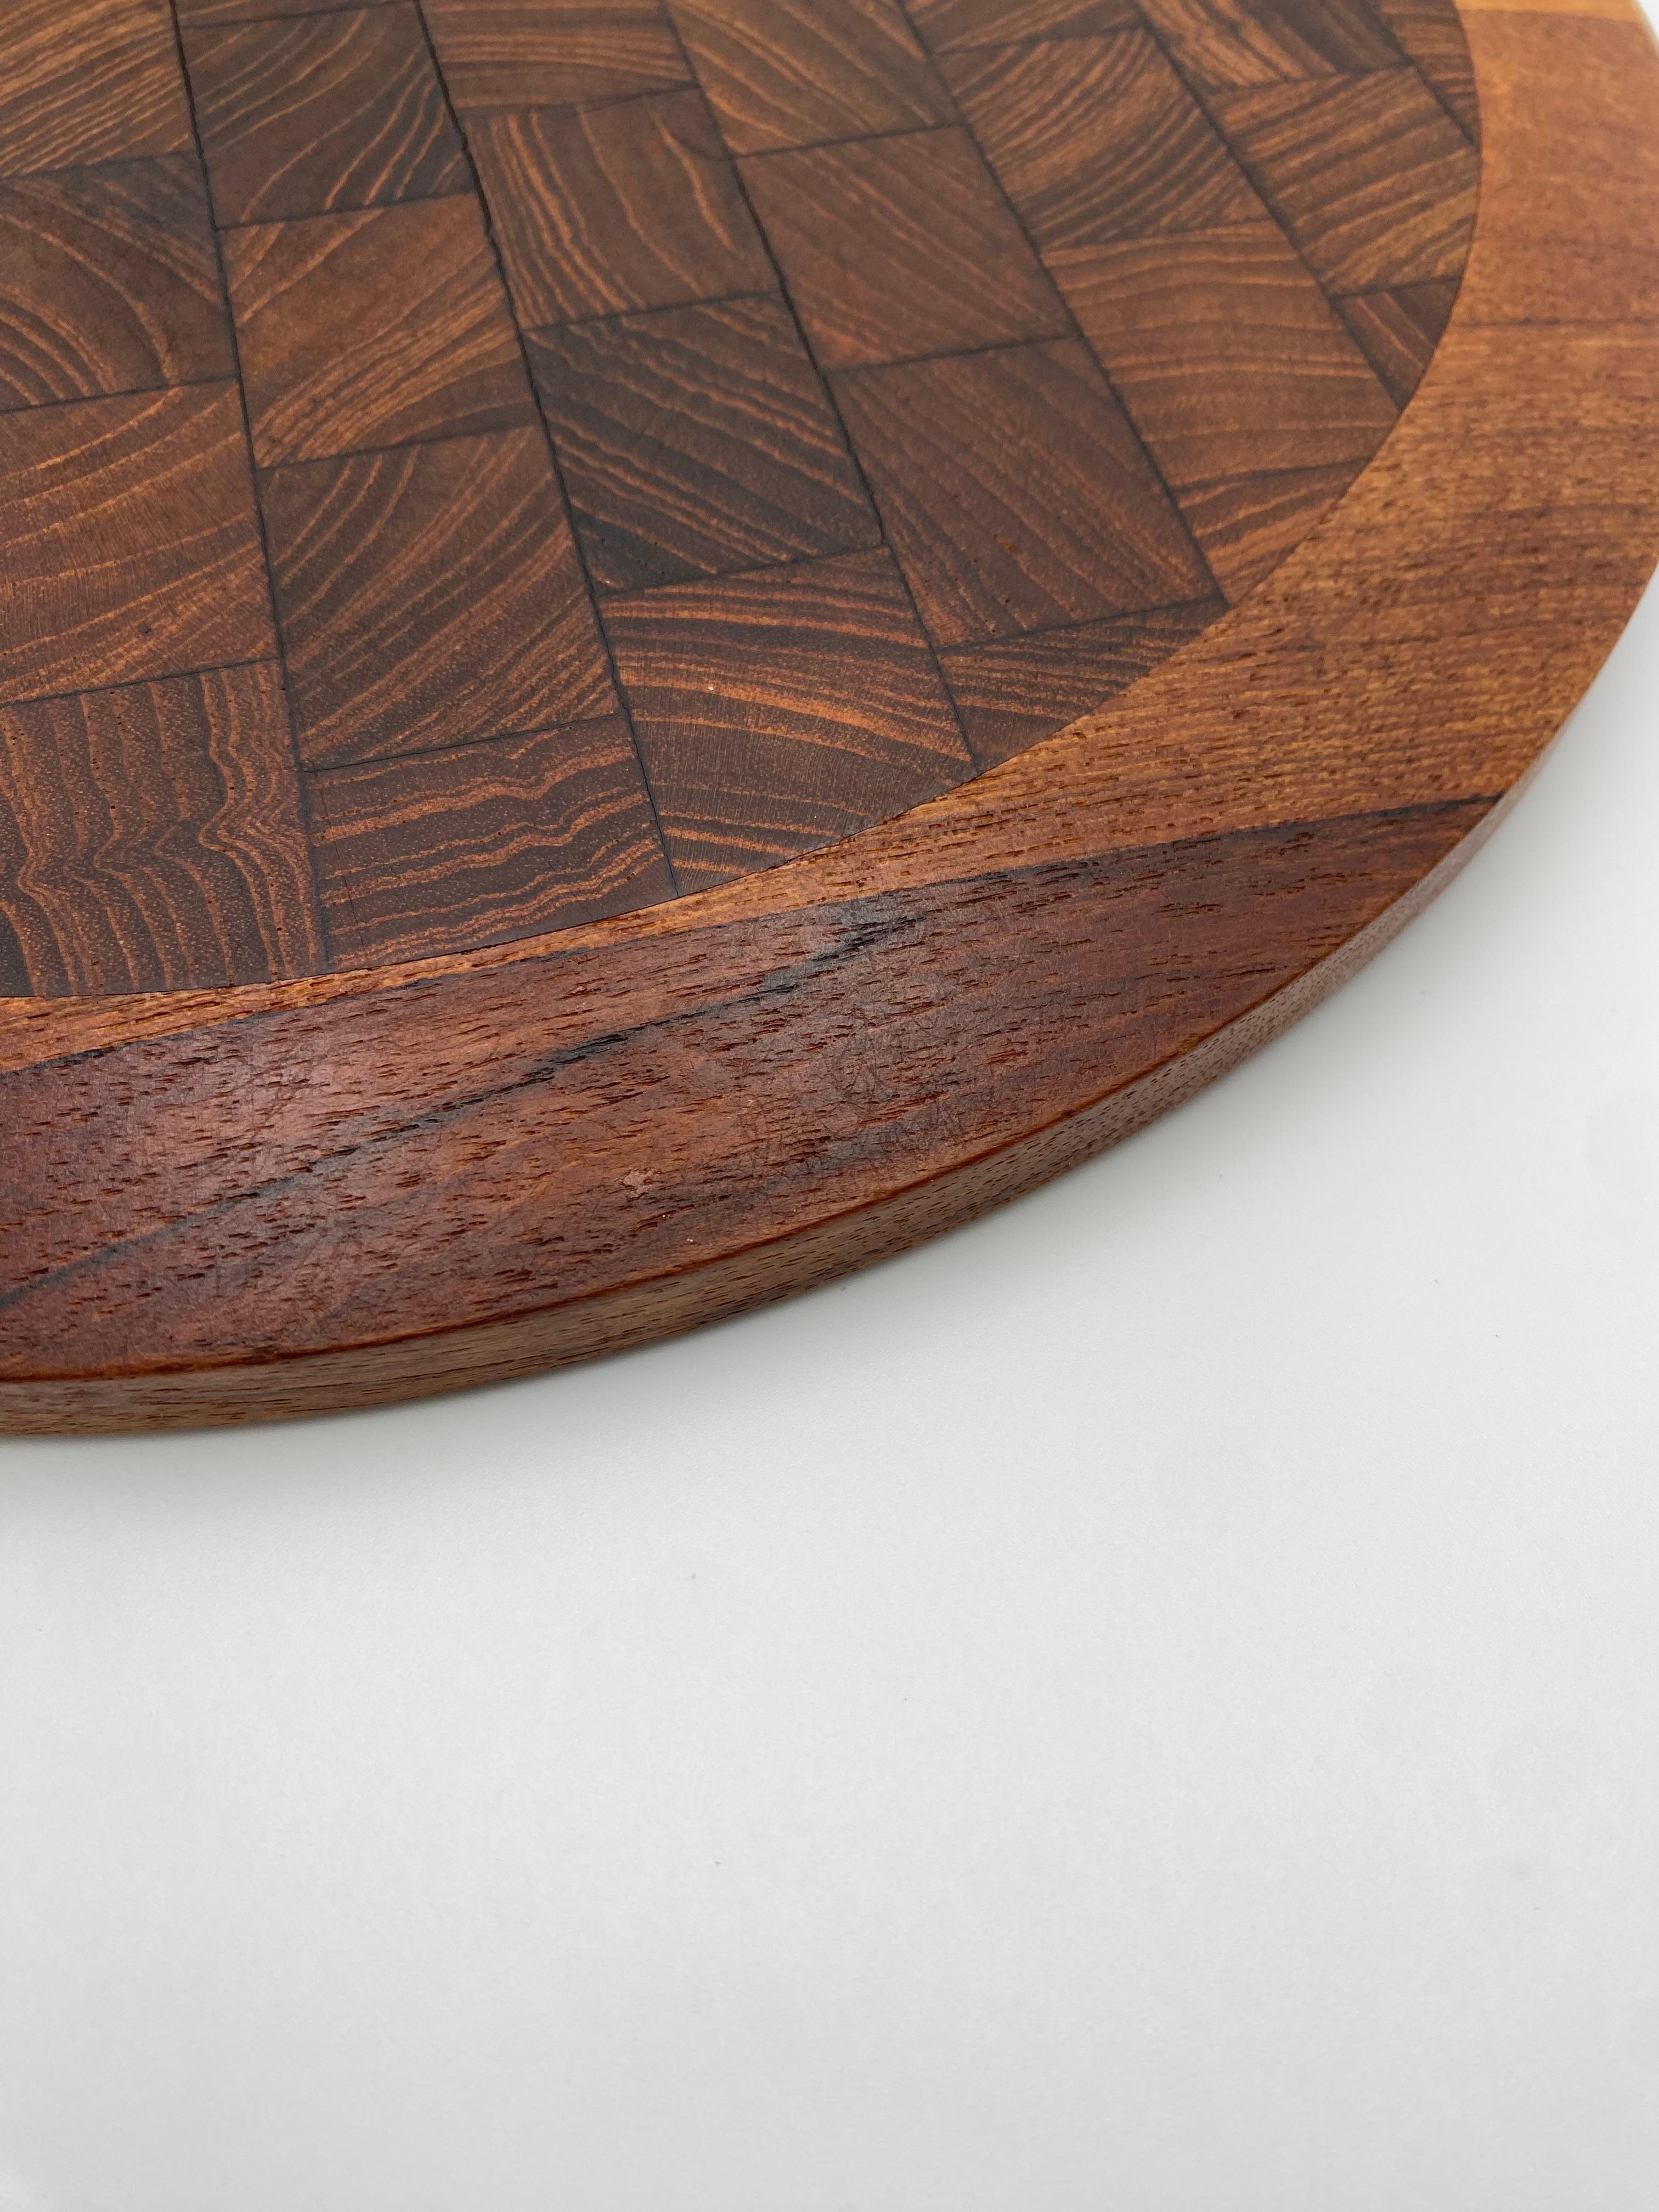 Hand-Crafted Round Teak Cutting Board By Dansk, Denmark 1970s  For Sale